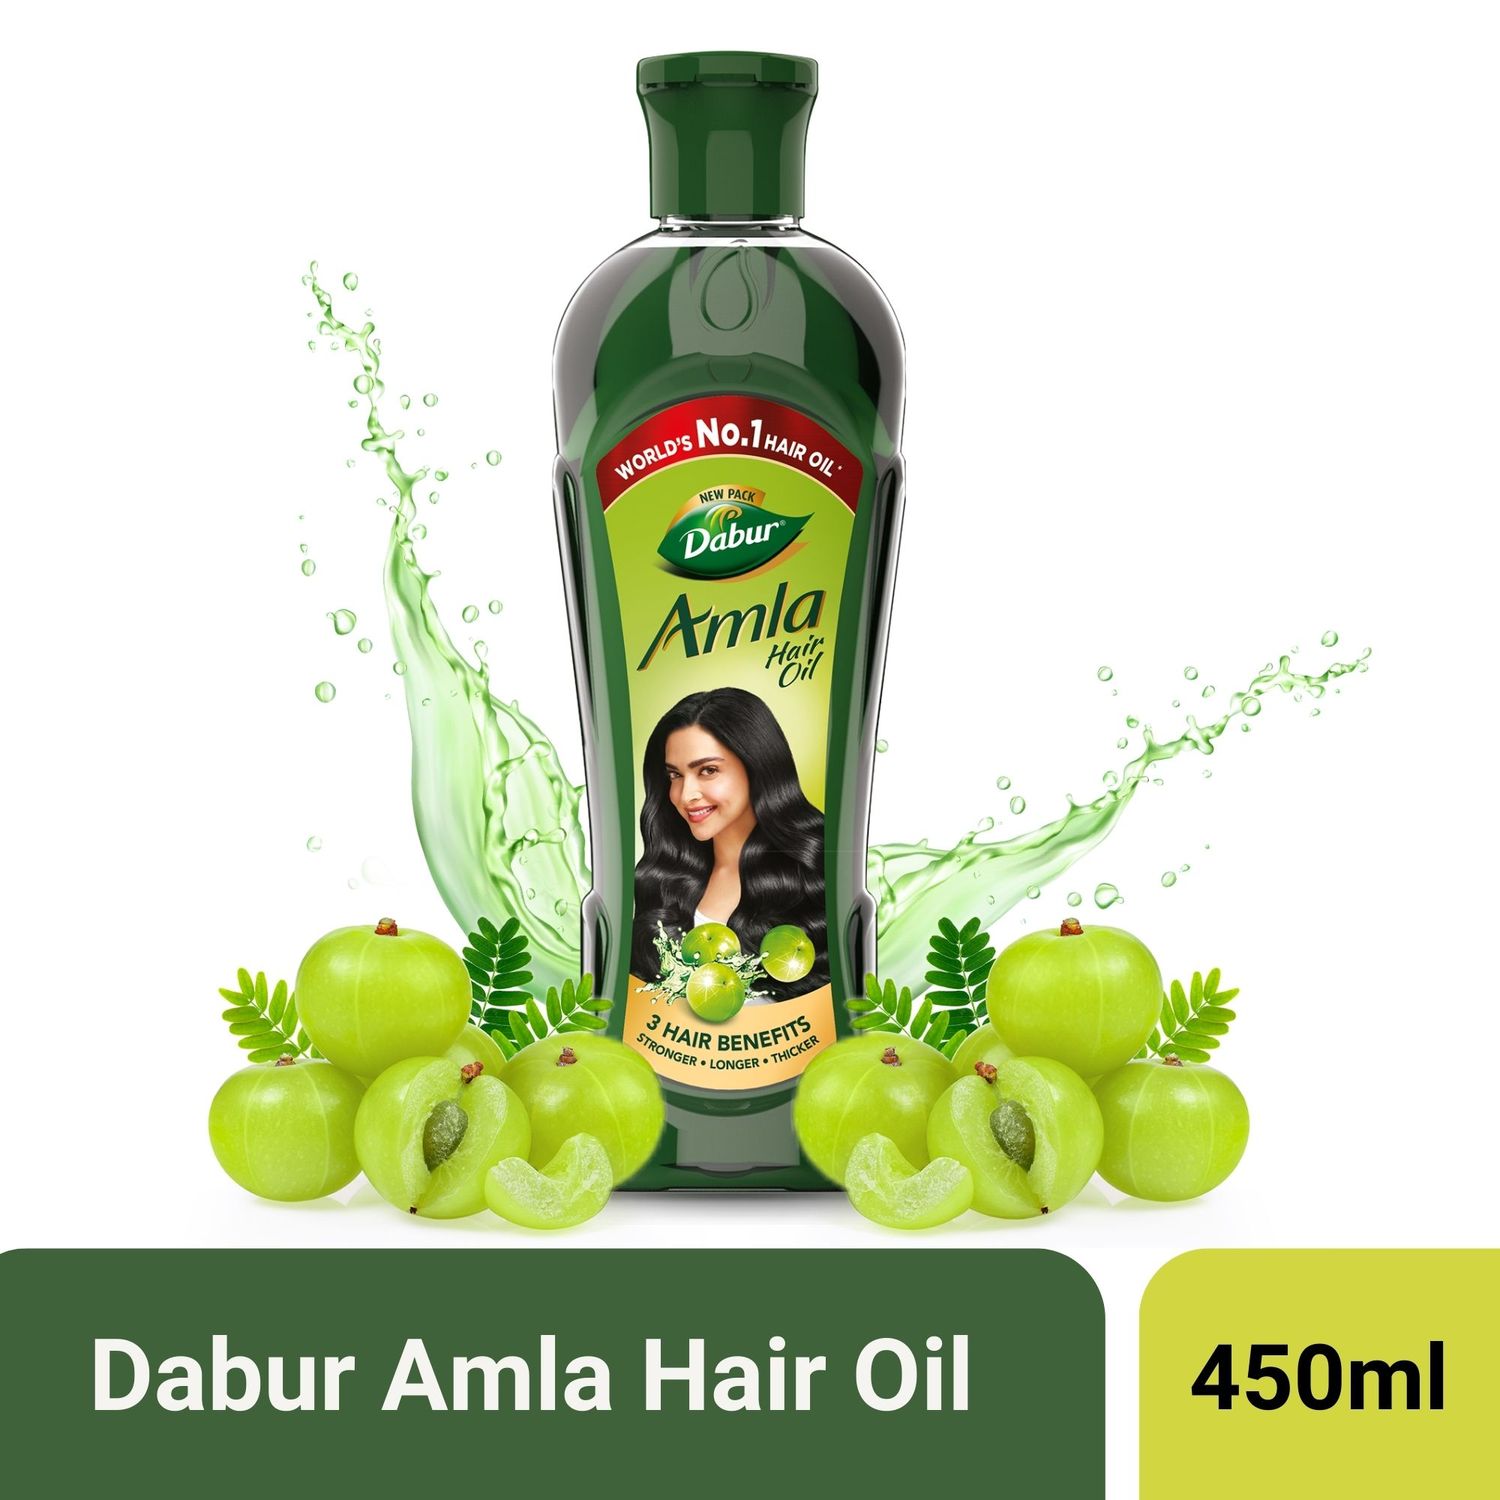 Buy Dabur Amla Hair Oil - 450 ml | For Strong, Long and Thick hair | Nourishes Scalp | Controls Hair Fall, Strengthens Hair & Promotes Hair Growth - Purplle